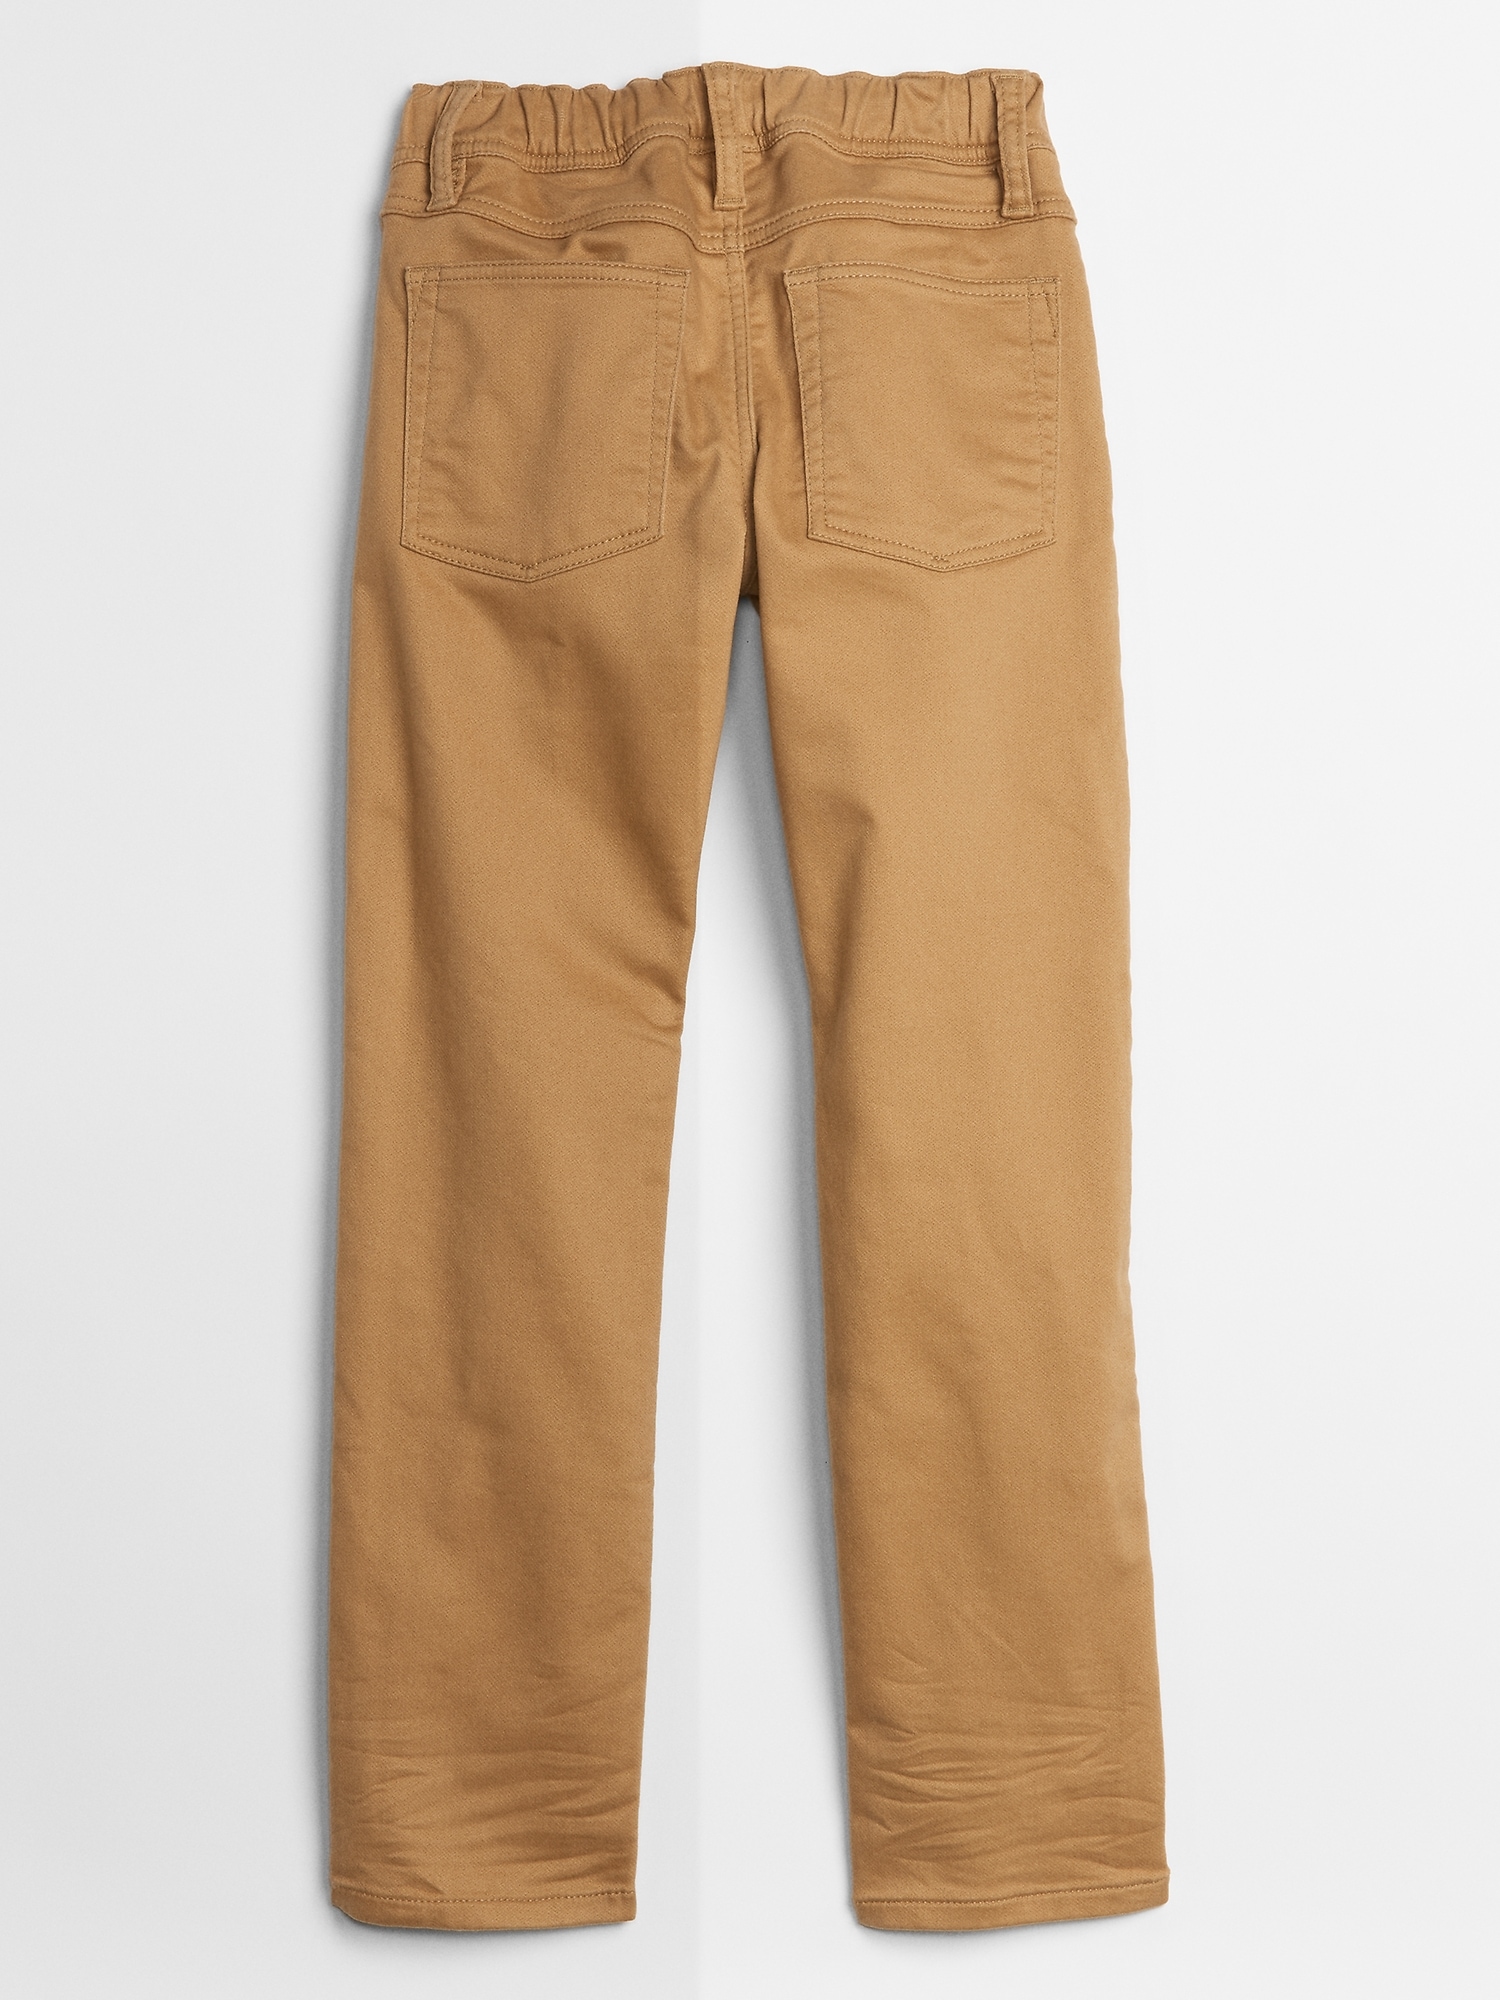 Kids Pull-On Jeans In Slim Fit With Washwell | Gap Factory